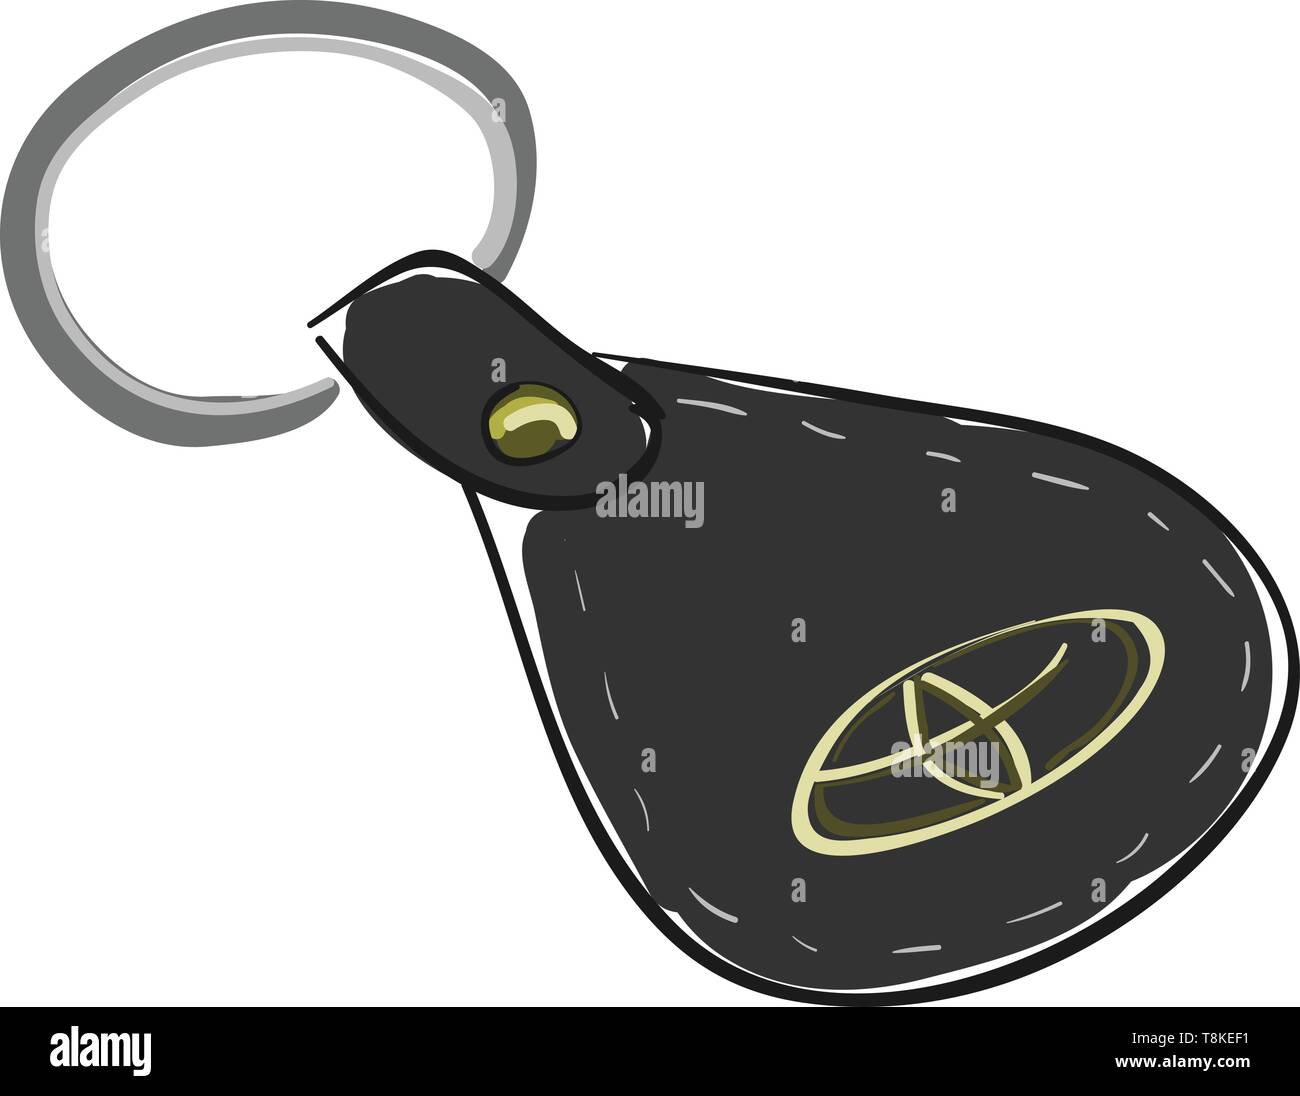 Clipart of the black leather Toyota key chain with the logo of the car works well especially as a gift to car owners or professional drivers, vector,  Stock Vector